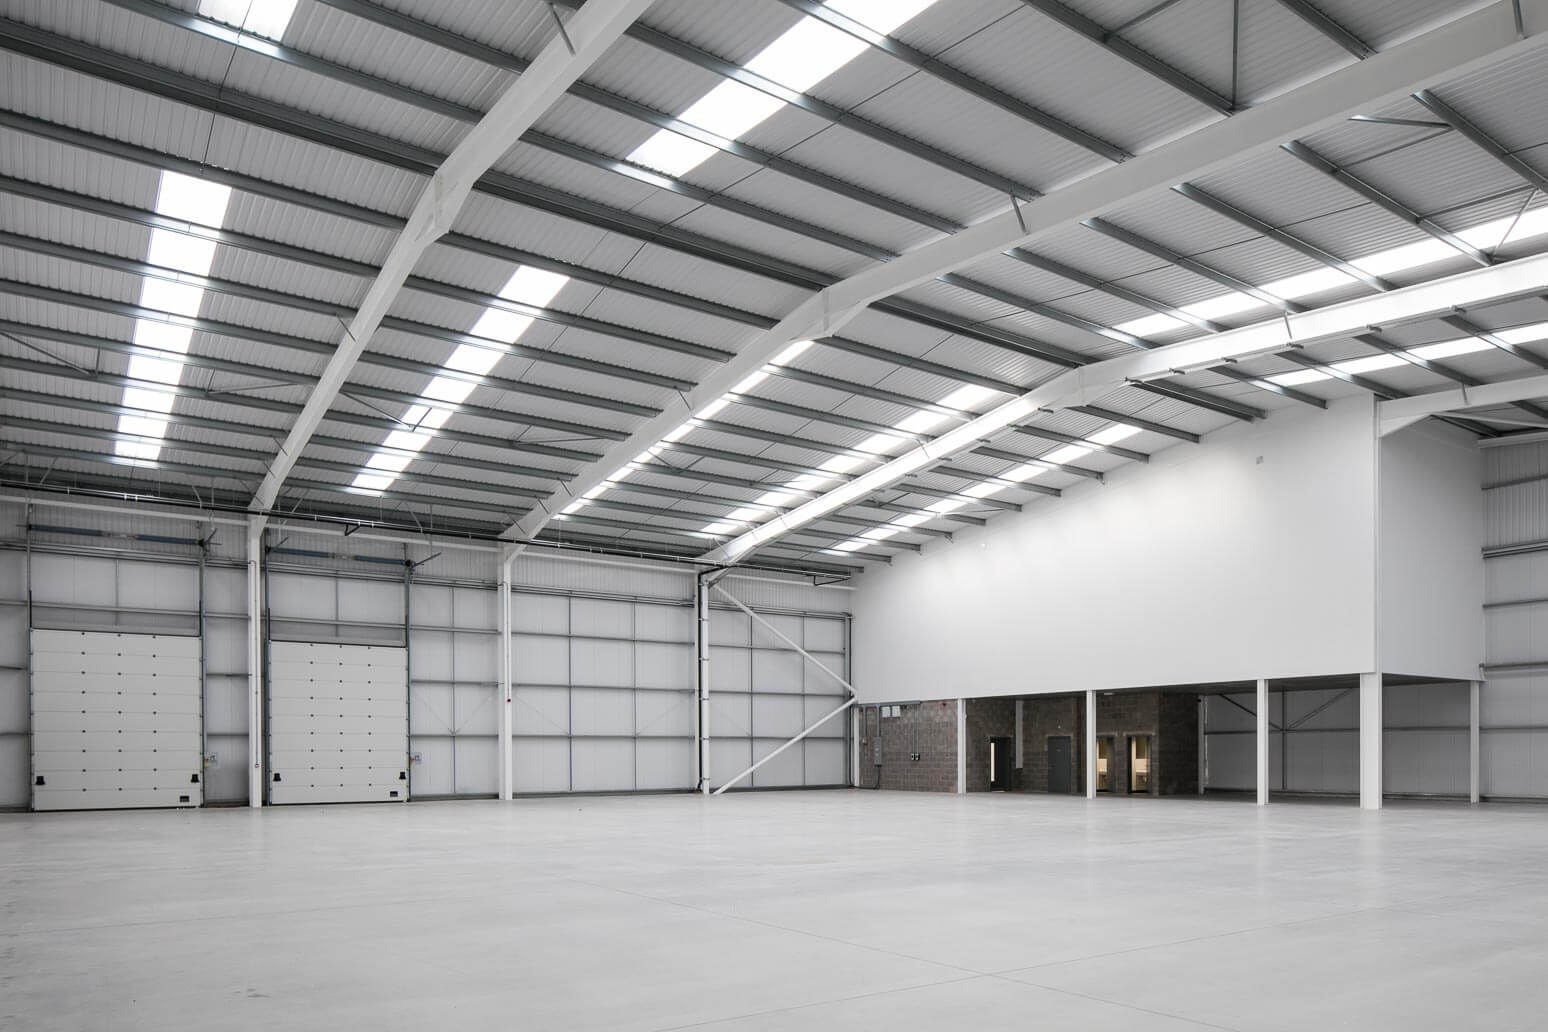 Commercial architecture and interior photography - Aurora Stockport Industrial Park